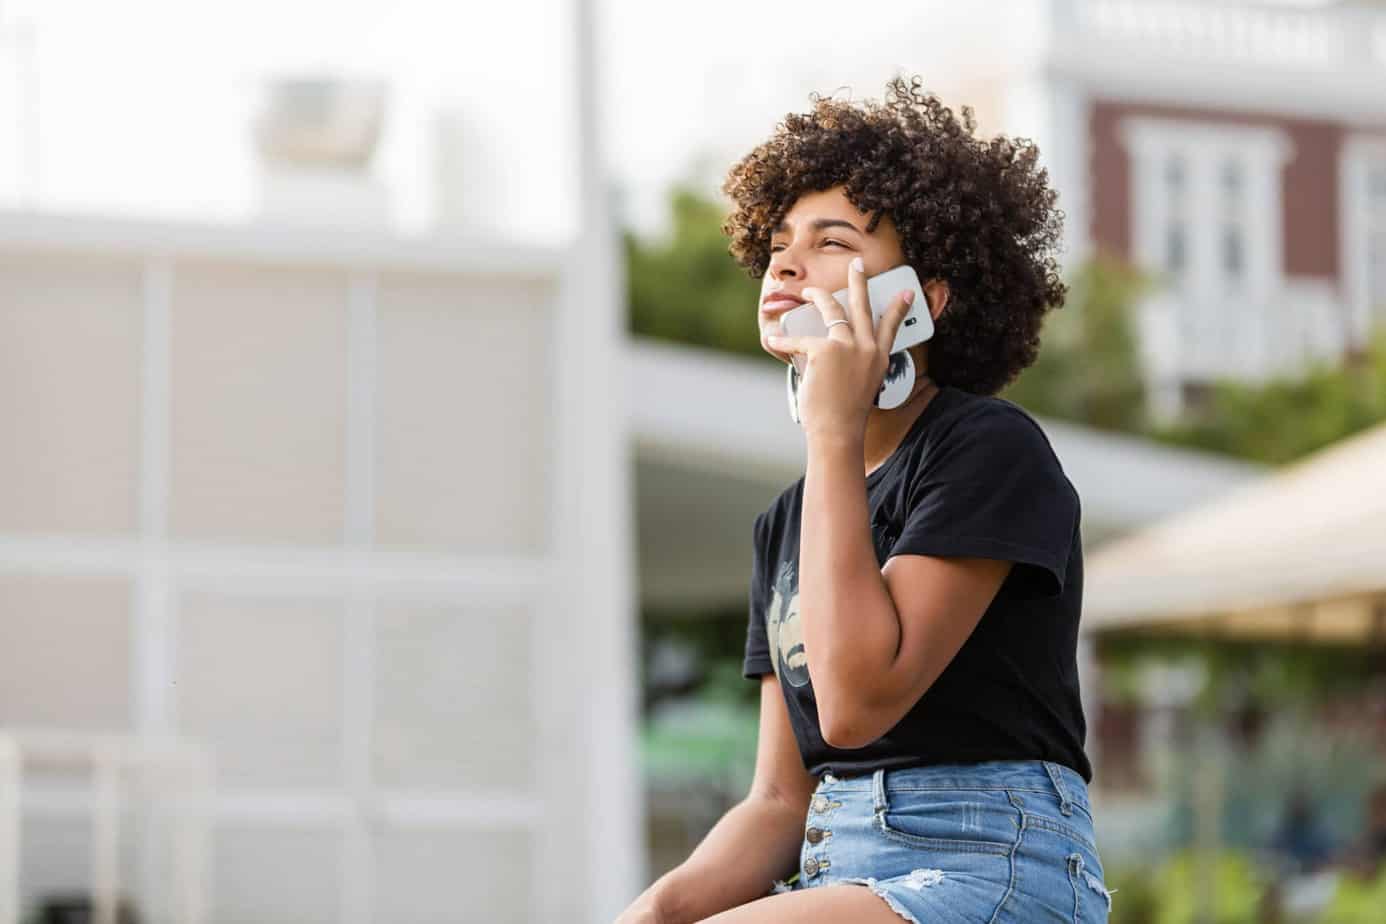 Women wearing cut-off blue jean shorts and a black t-shirts with African American images, sitting on a park bench while using the phone.